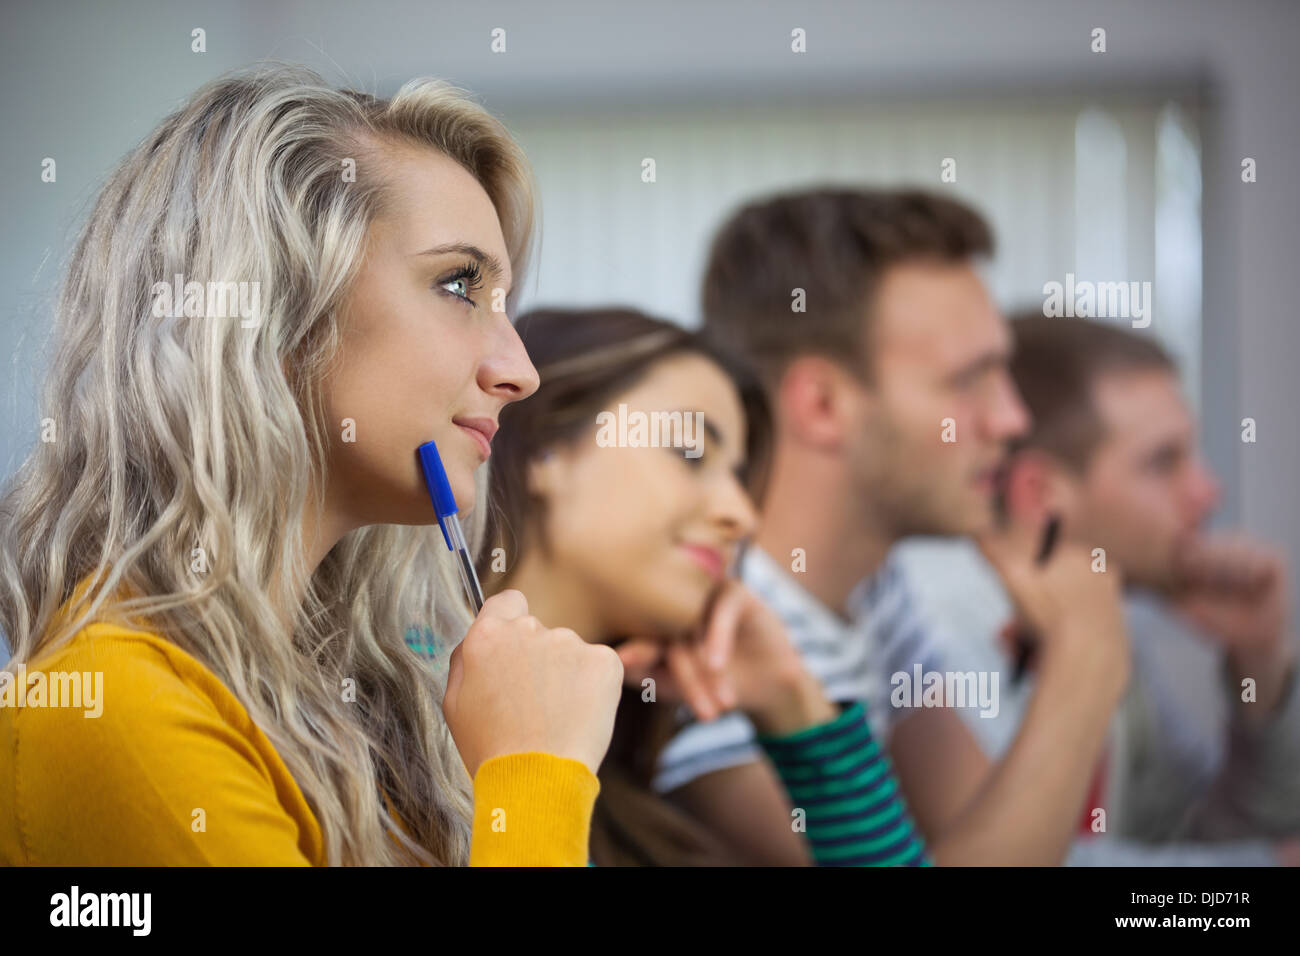 Blonde attentive student looking away Stock Photo